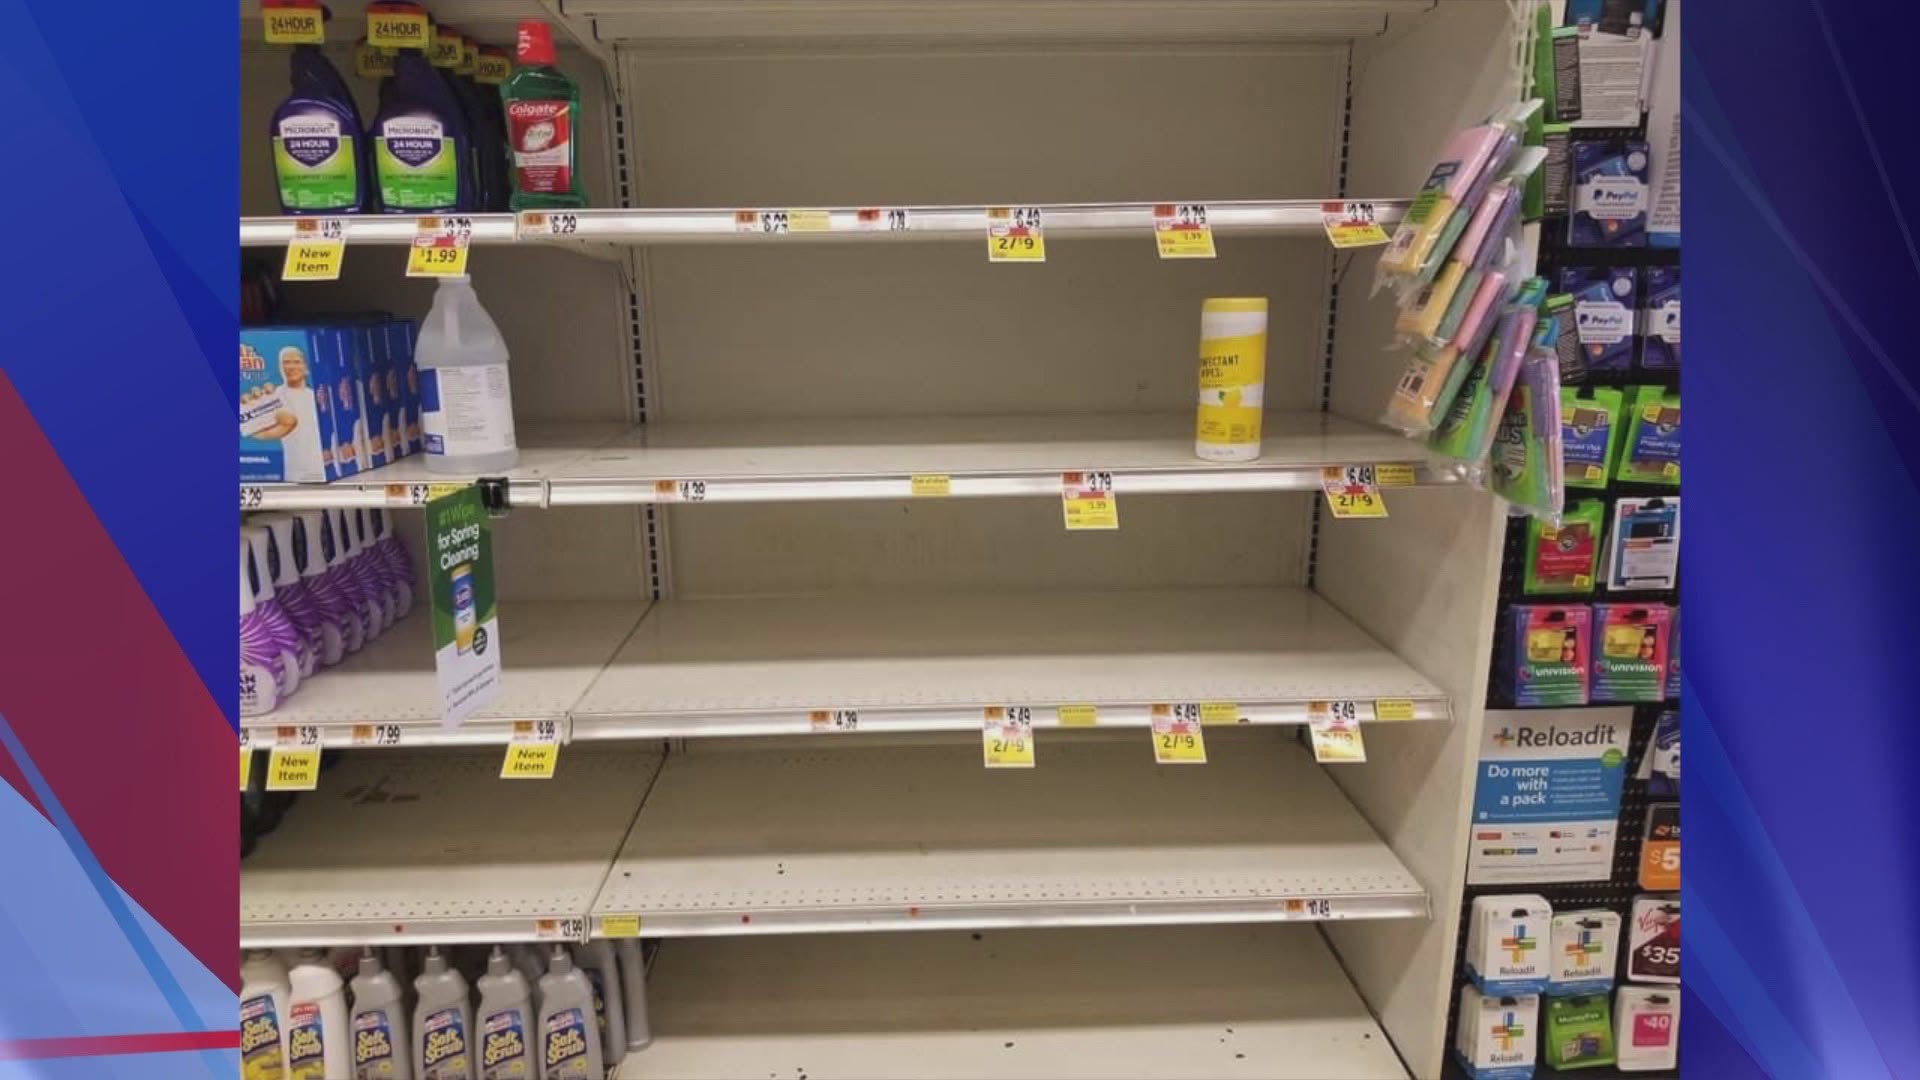 One way aisles, empty shelves--the COVID-19 outbreak is creating change in grocery stores